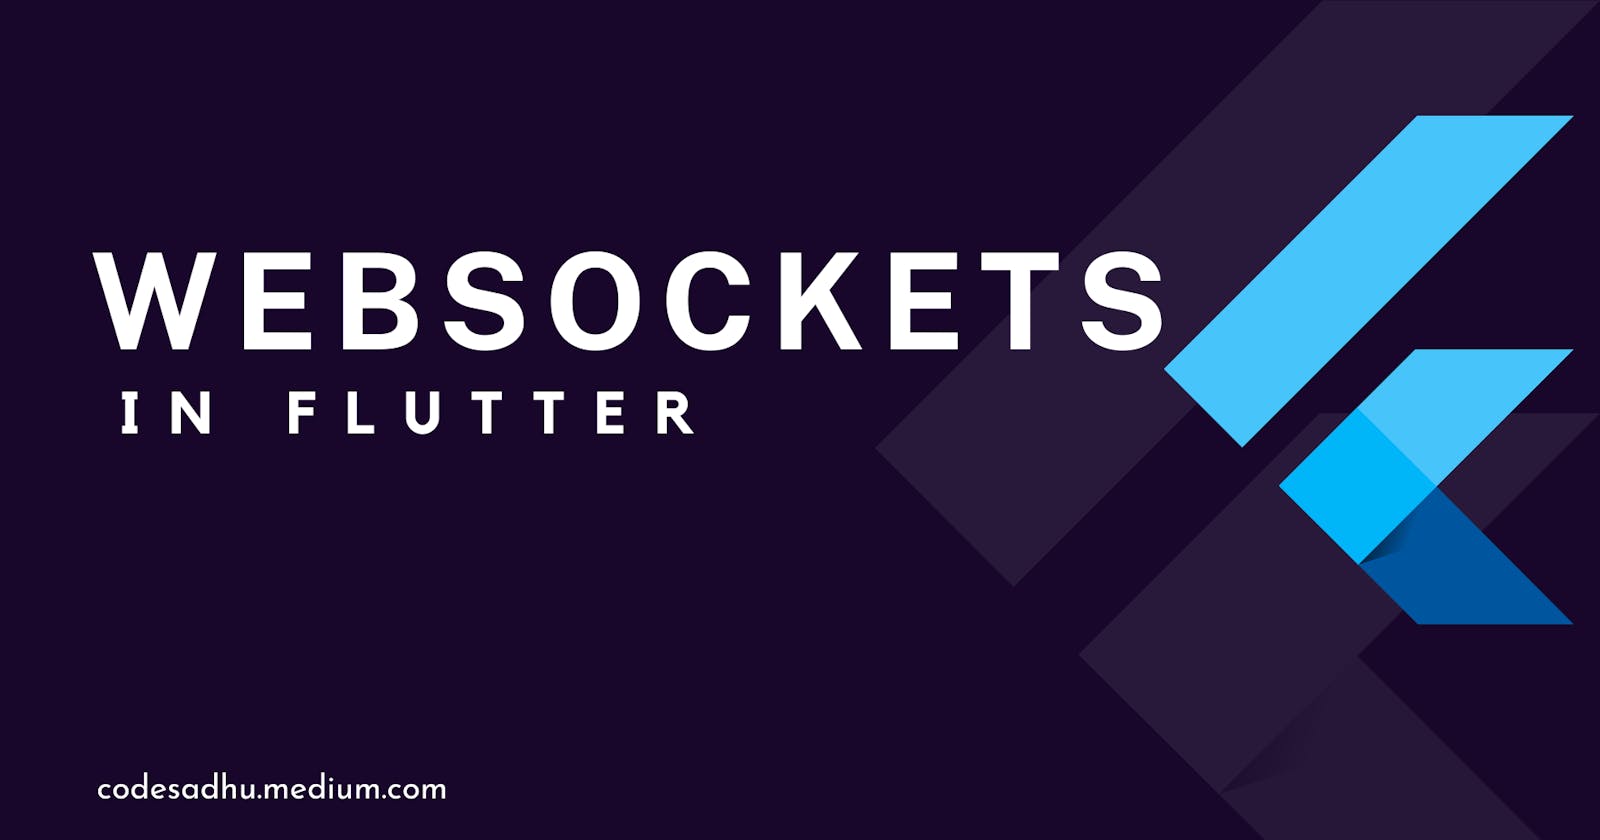 Websockets - What are those and how to use them in Flutter